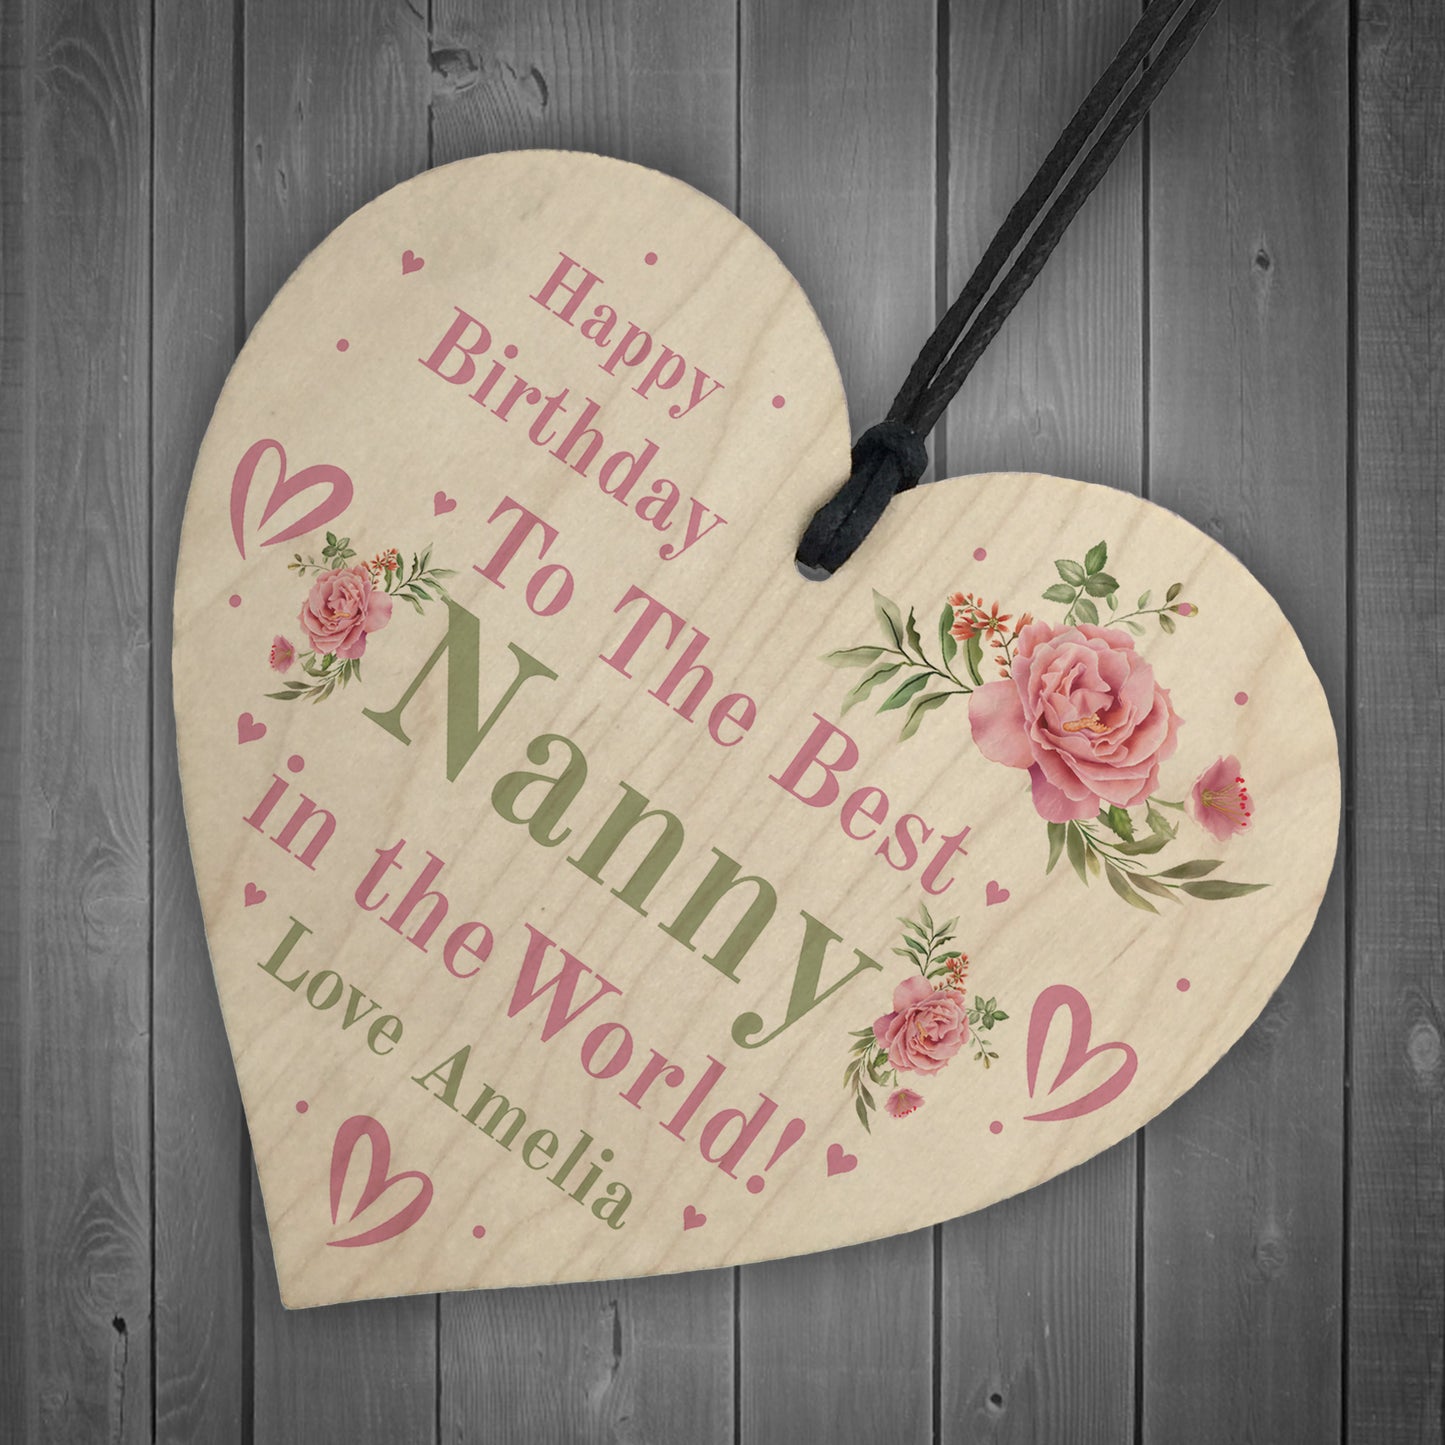 Happy Birthday Nanny Gift Hanging Sign For Birthday Personalised